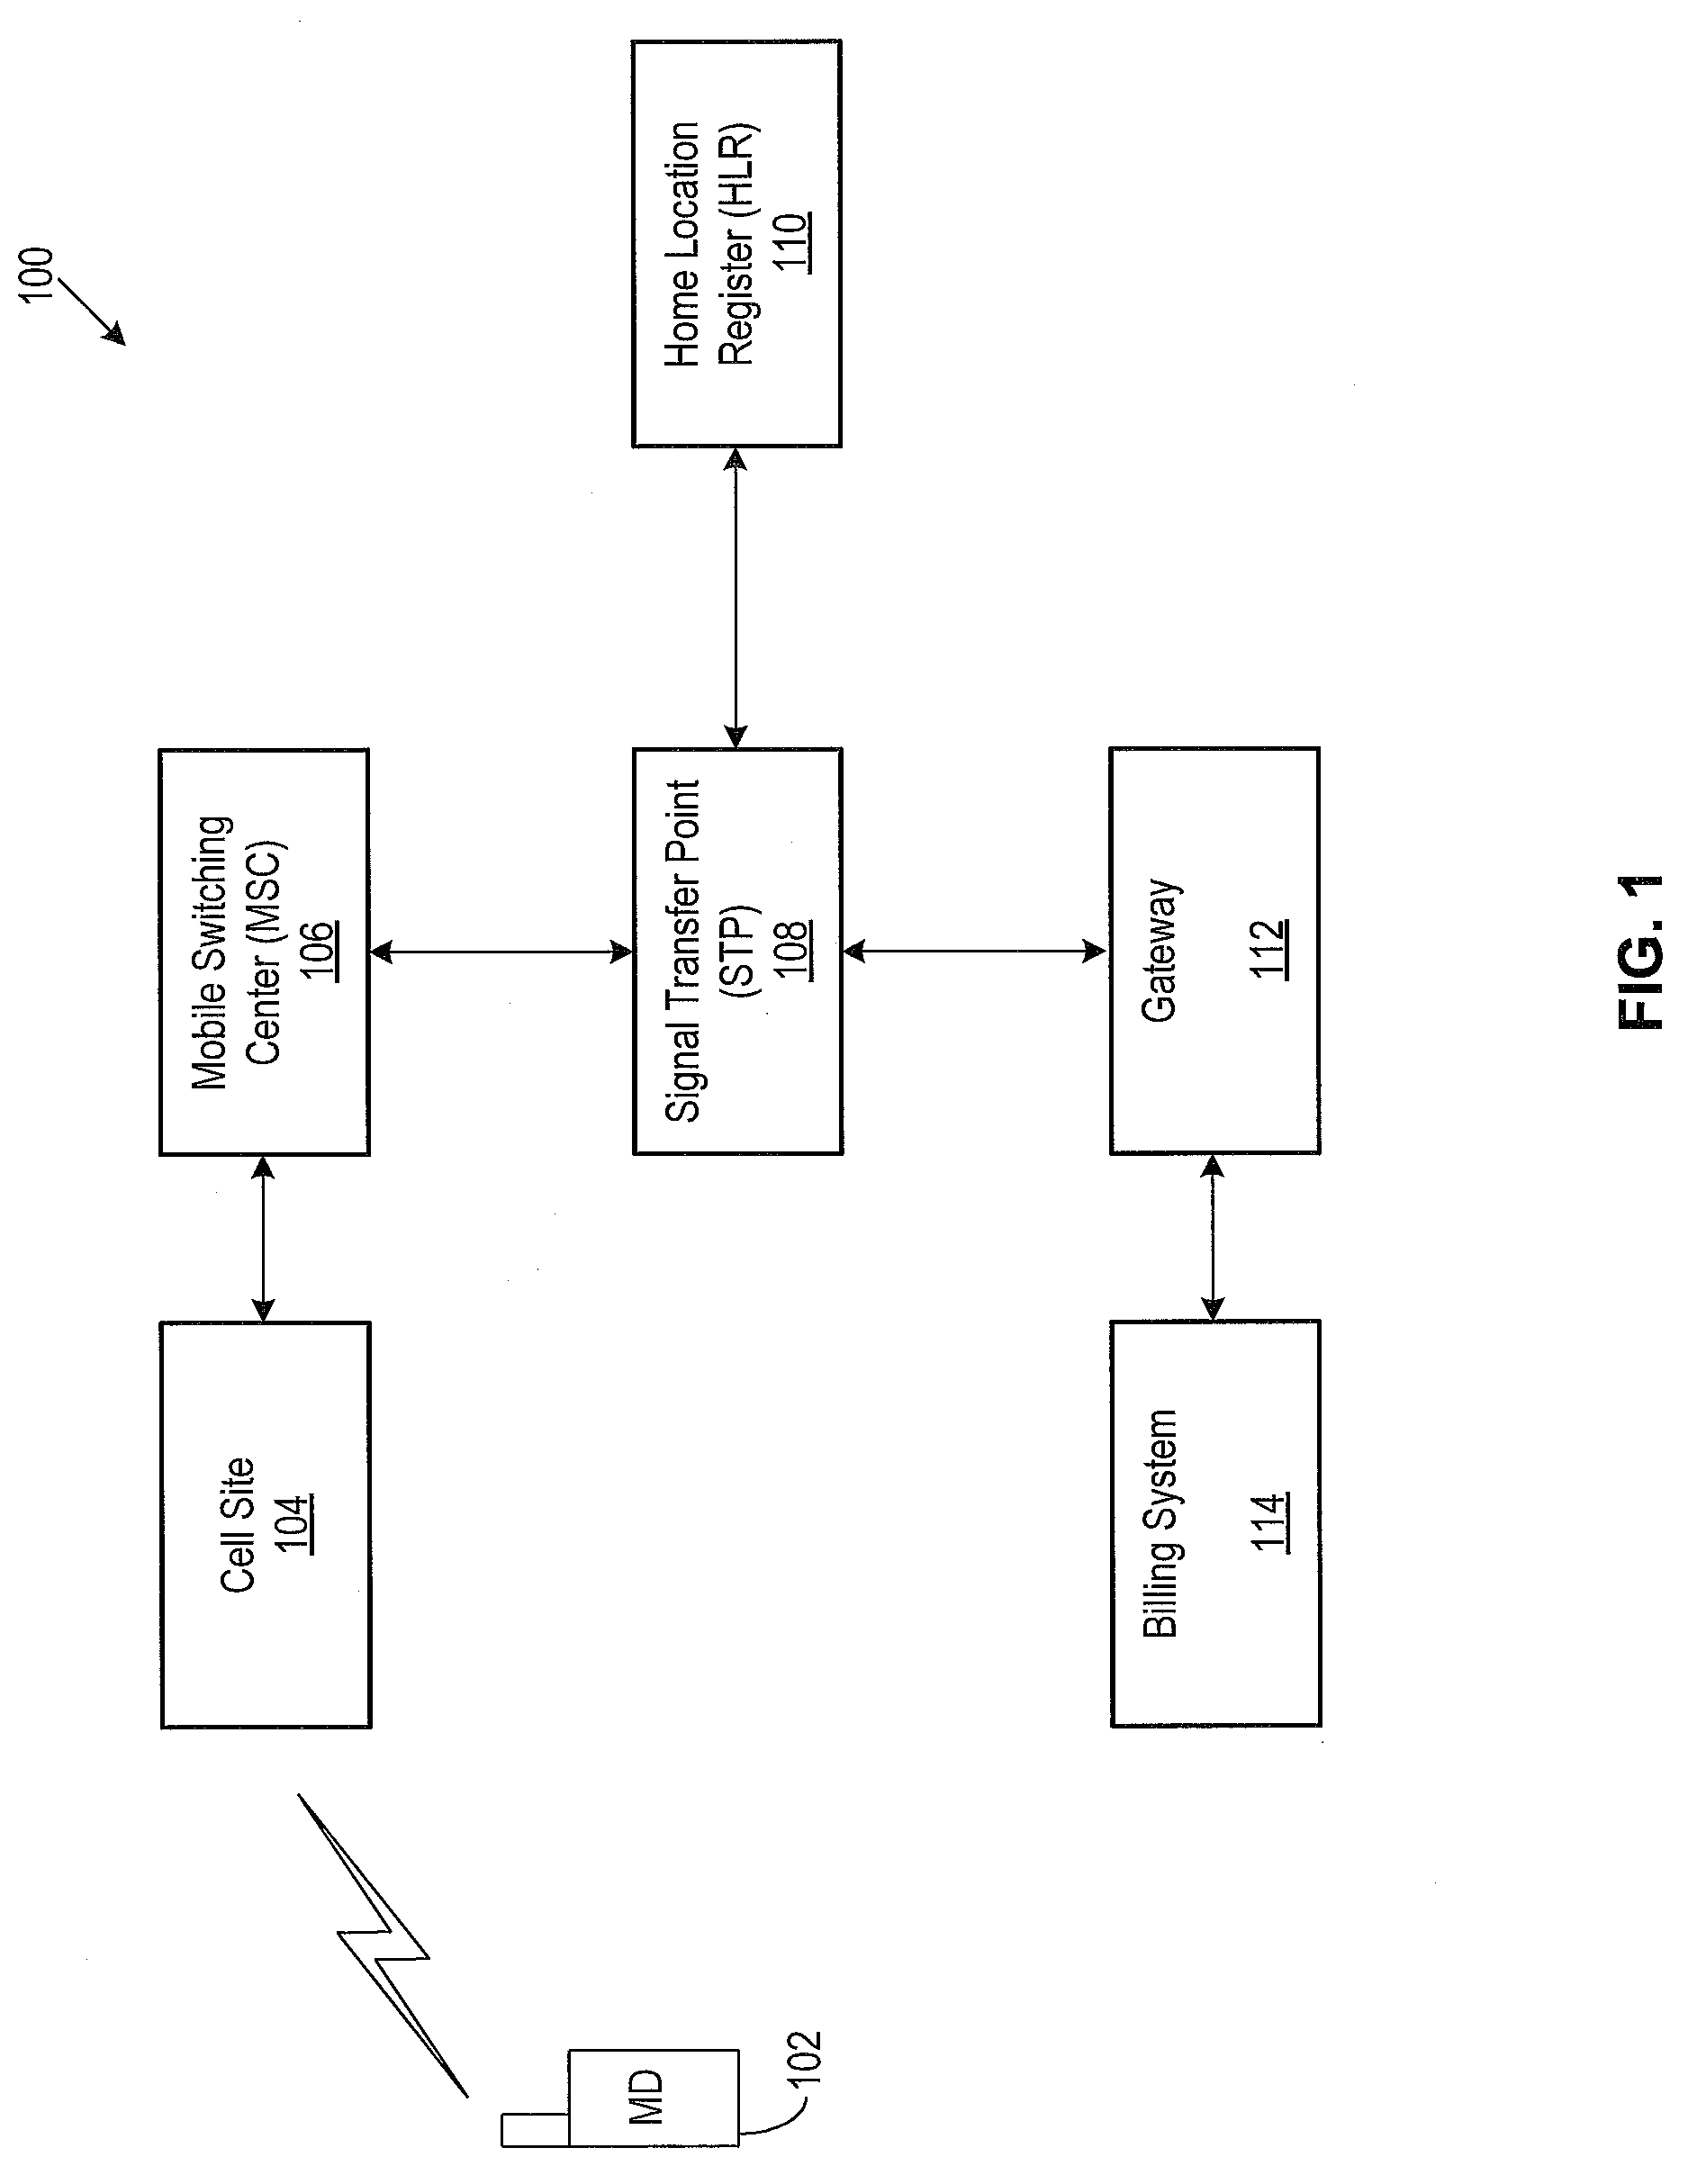 System and method for providing airtime overdraft protection